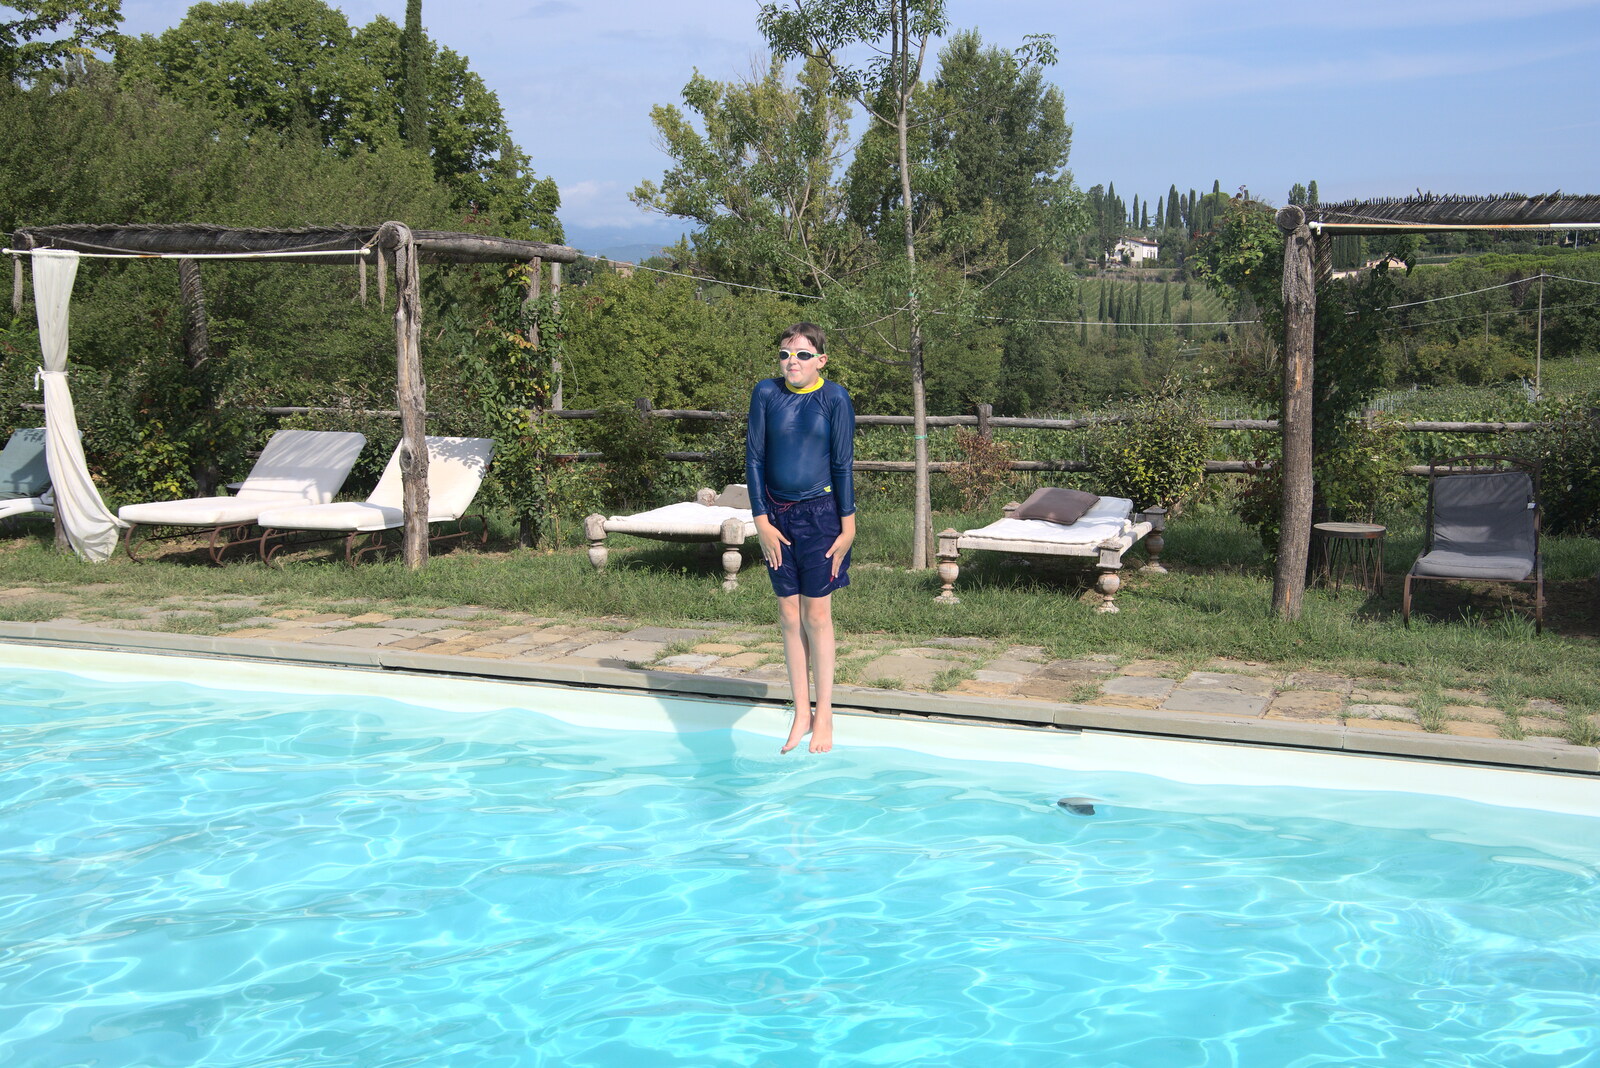 The Flags of Arezzo, Tuscany, Italy - 28th August 2022: Fred jumps into the pool